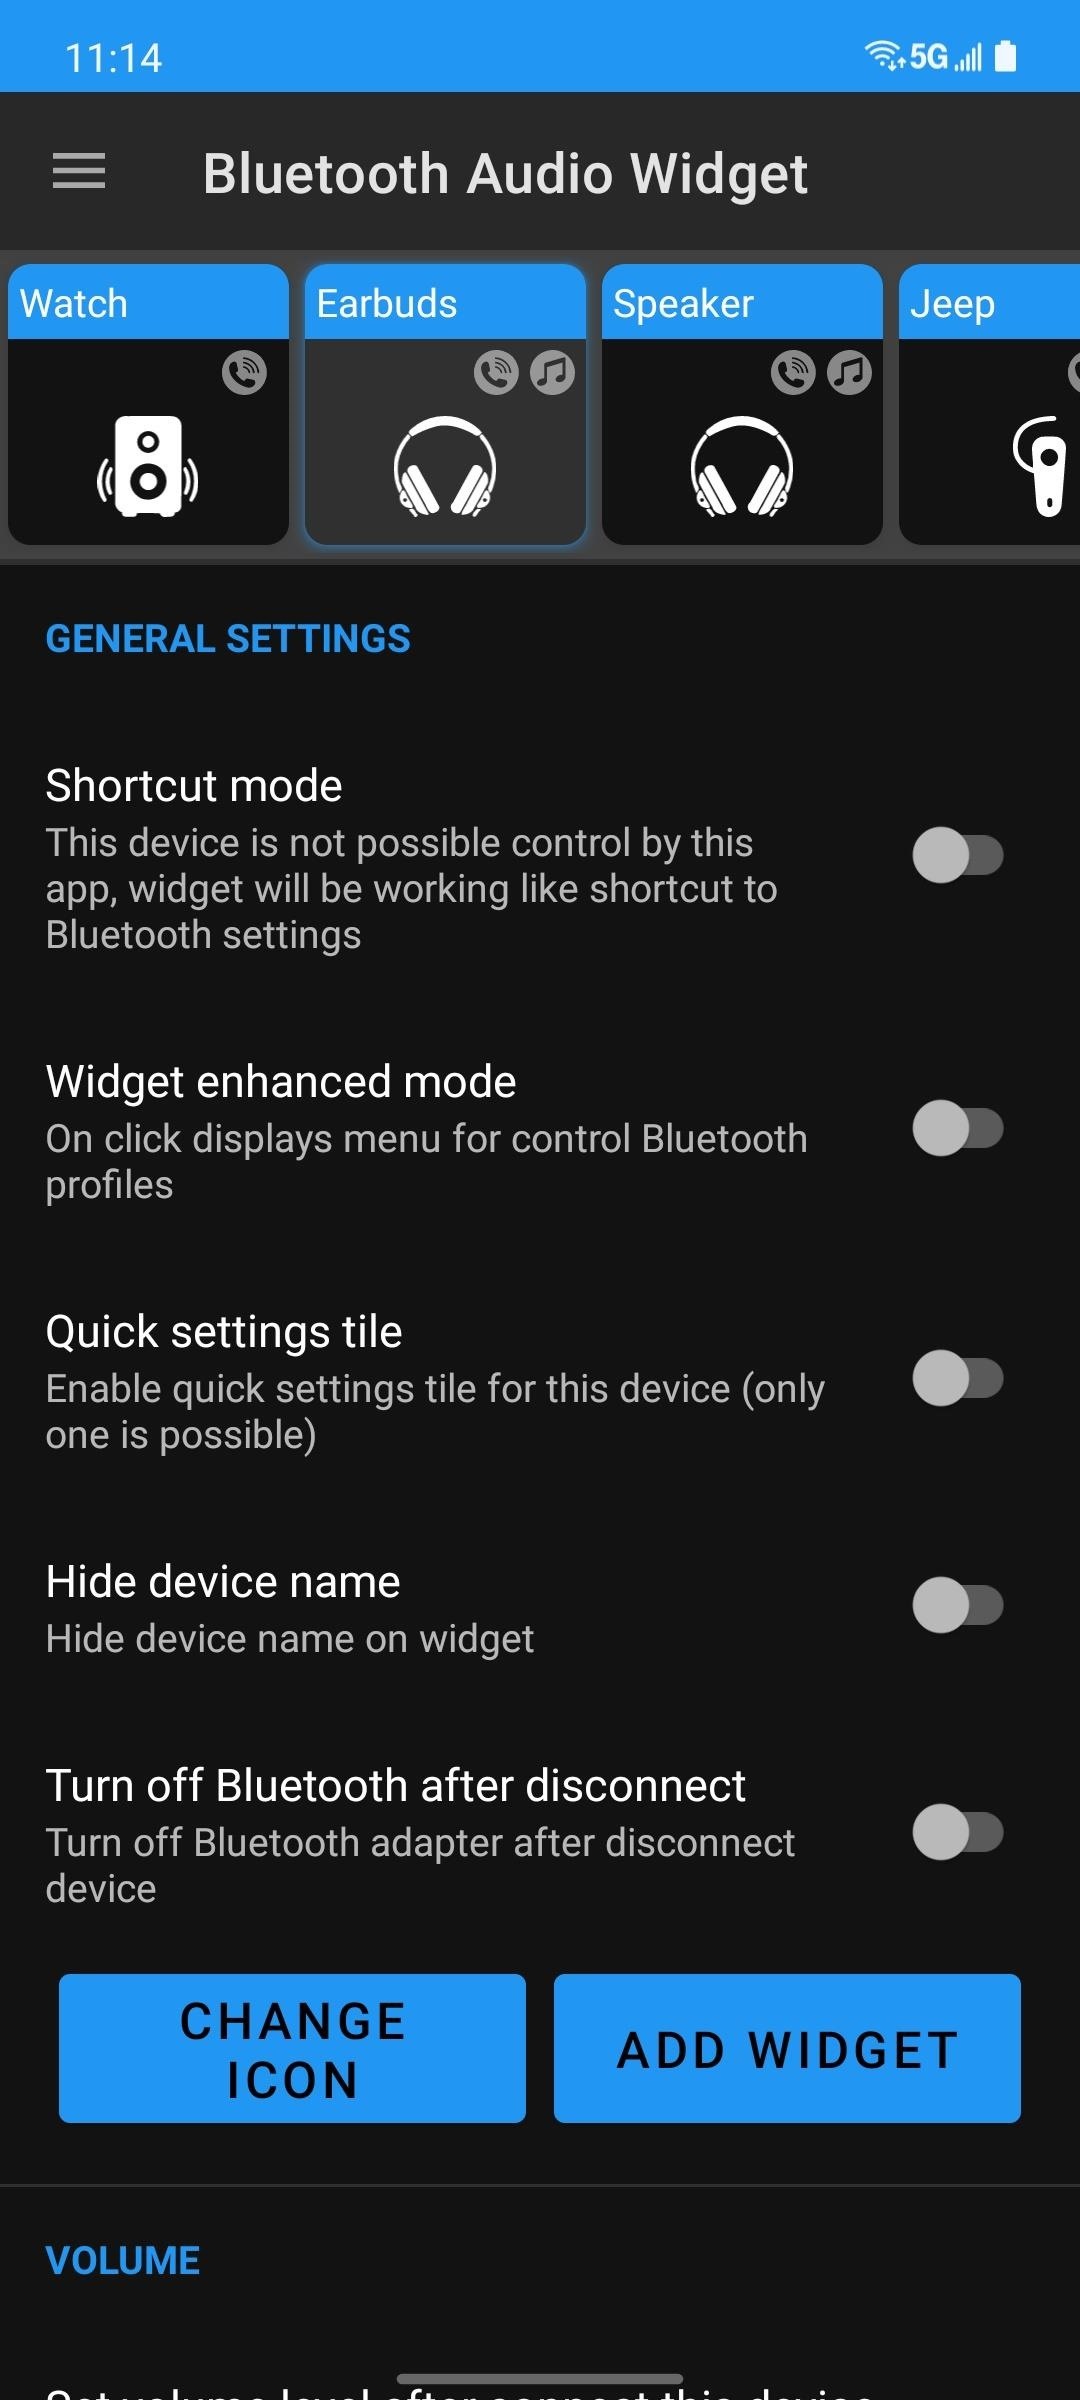 Open the Settings app on your Android device
Tap on Bluetooth